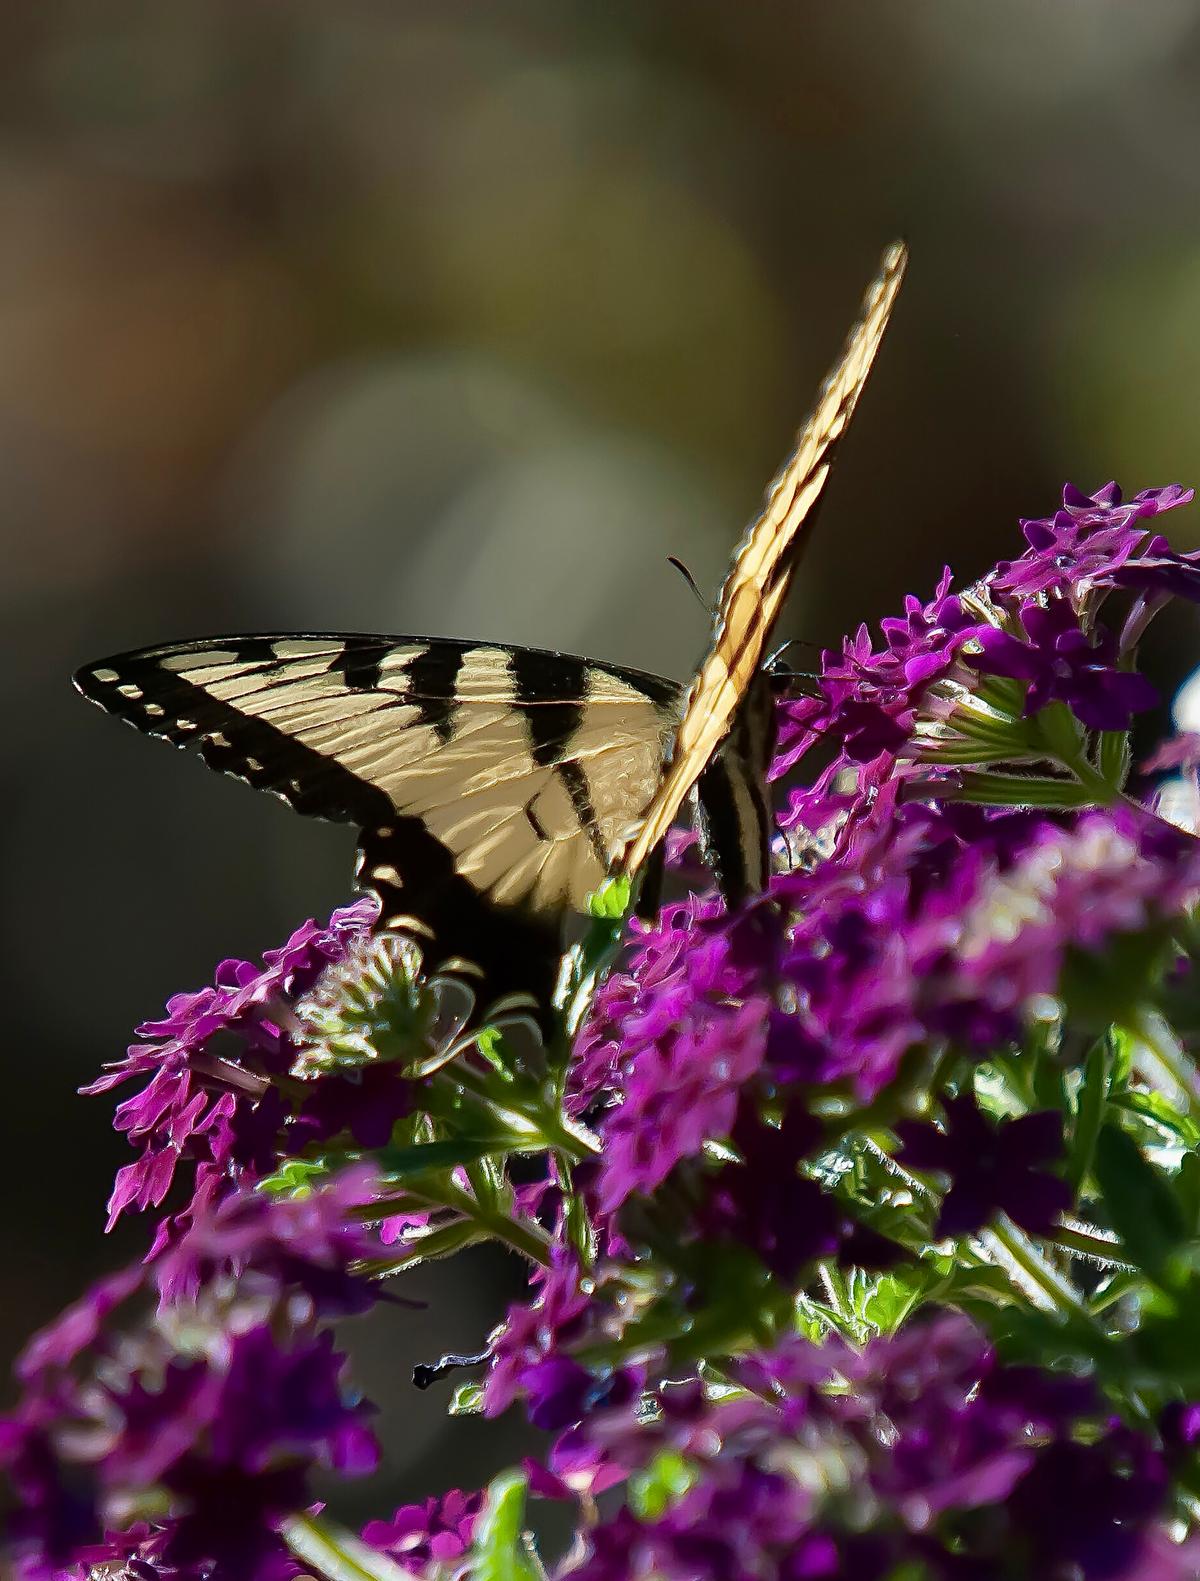 This Eastern Tiger Swallowtail was seen on the rare colored Superbena Royale Plum Wine. (Norman Winter/TNS)